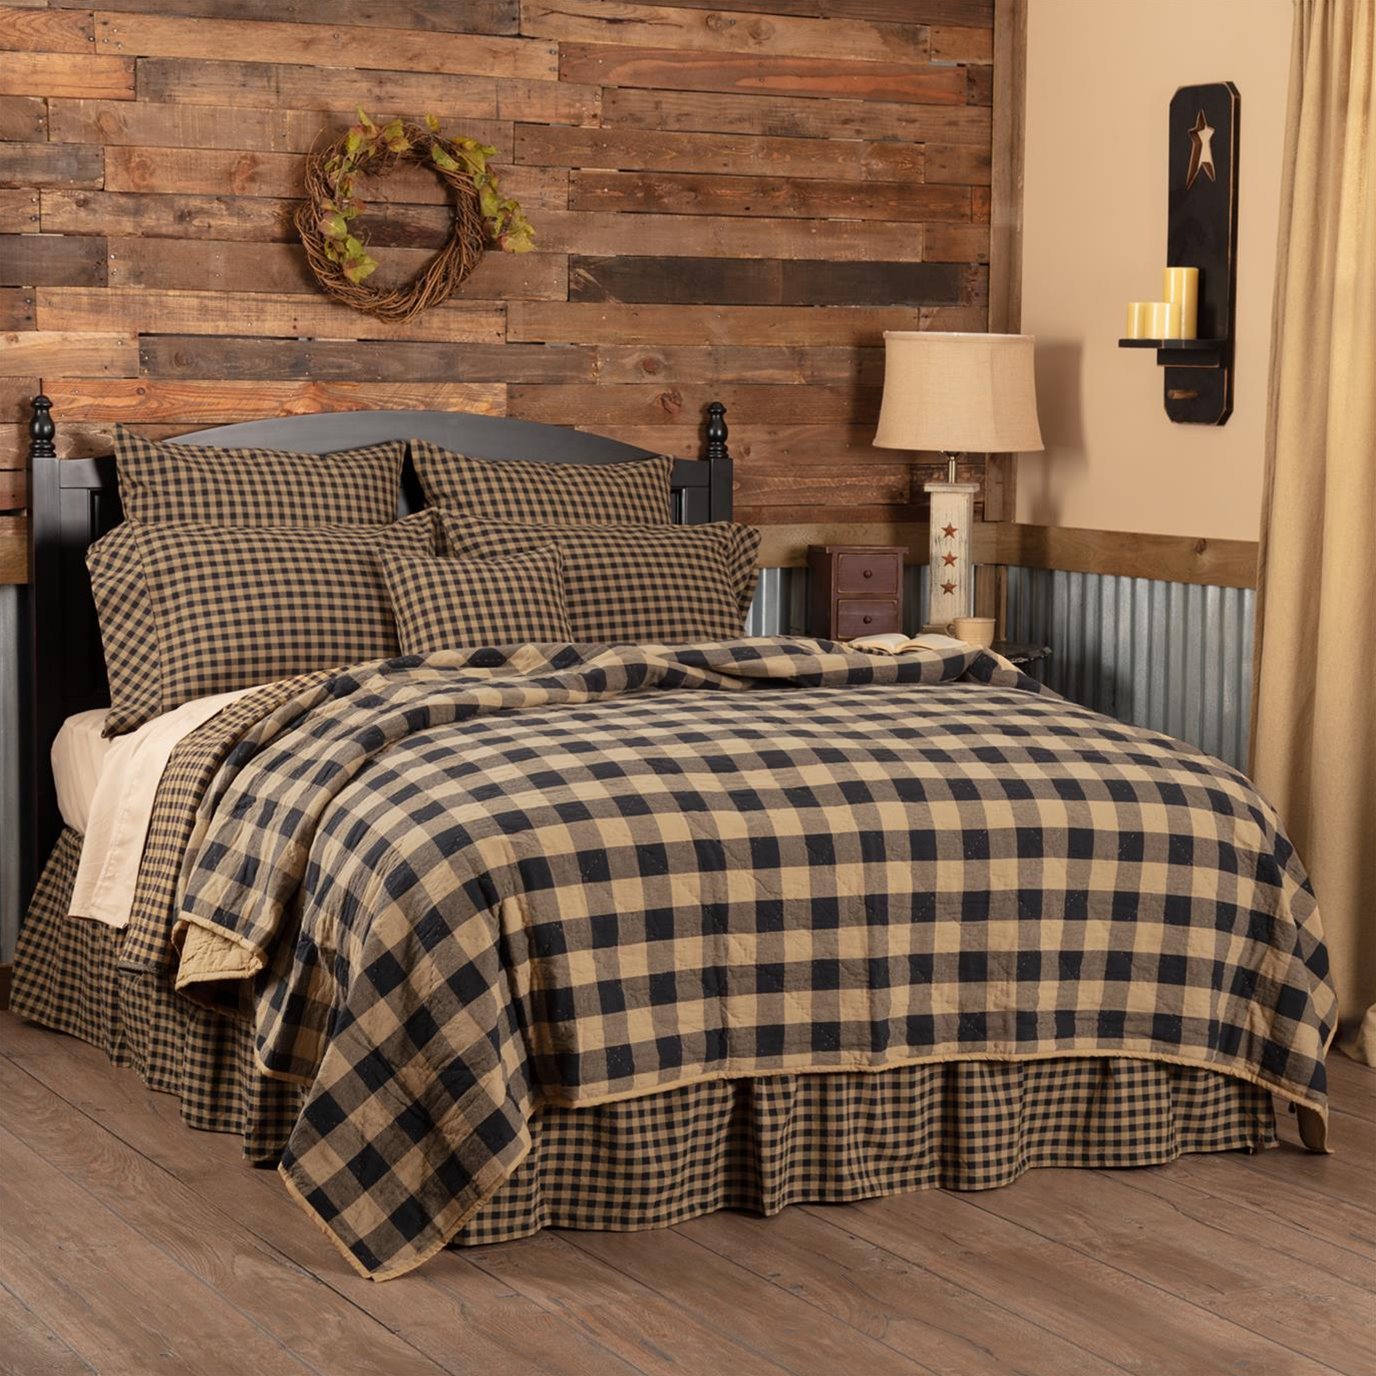 Black Check California King Quilt Coverlet 130wx115l By Mayflower